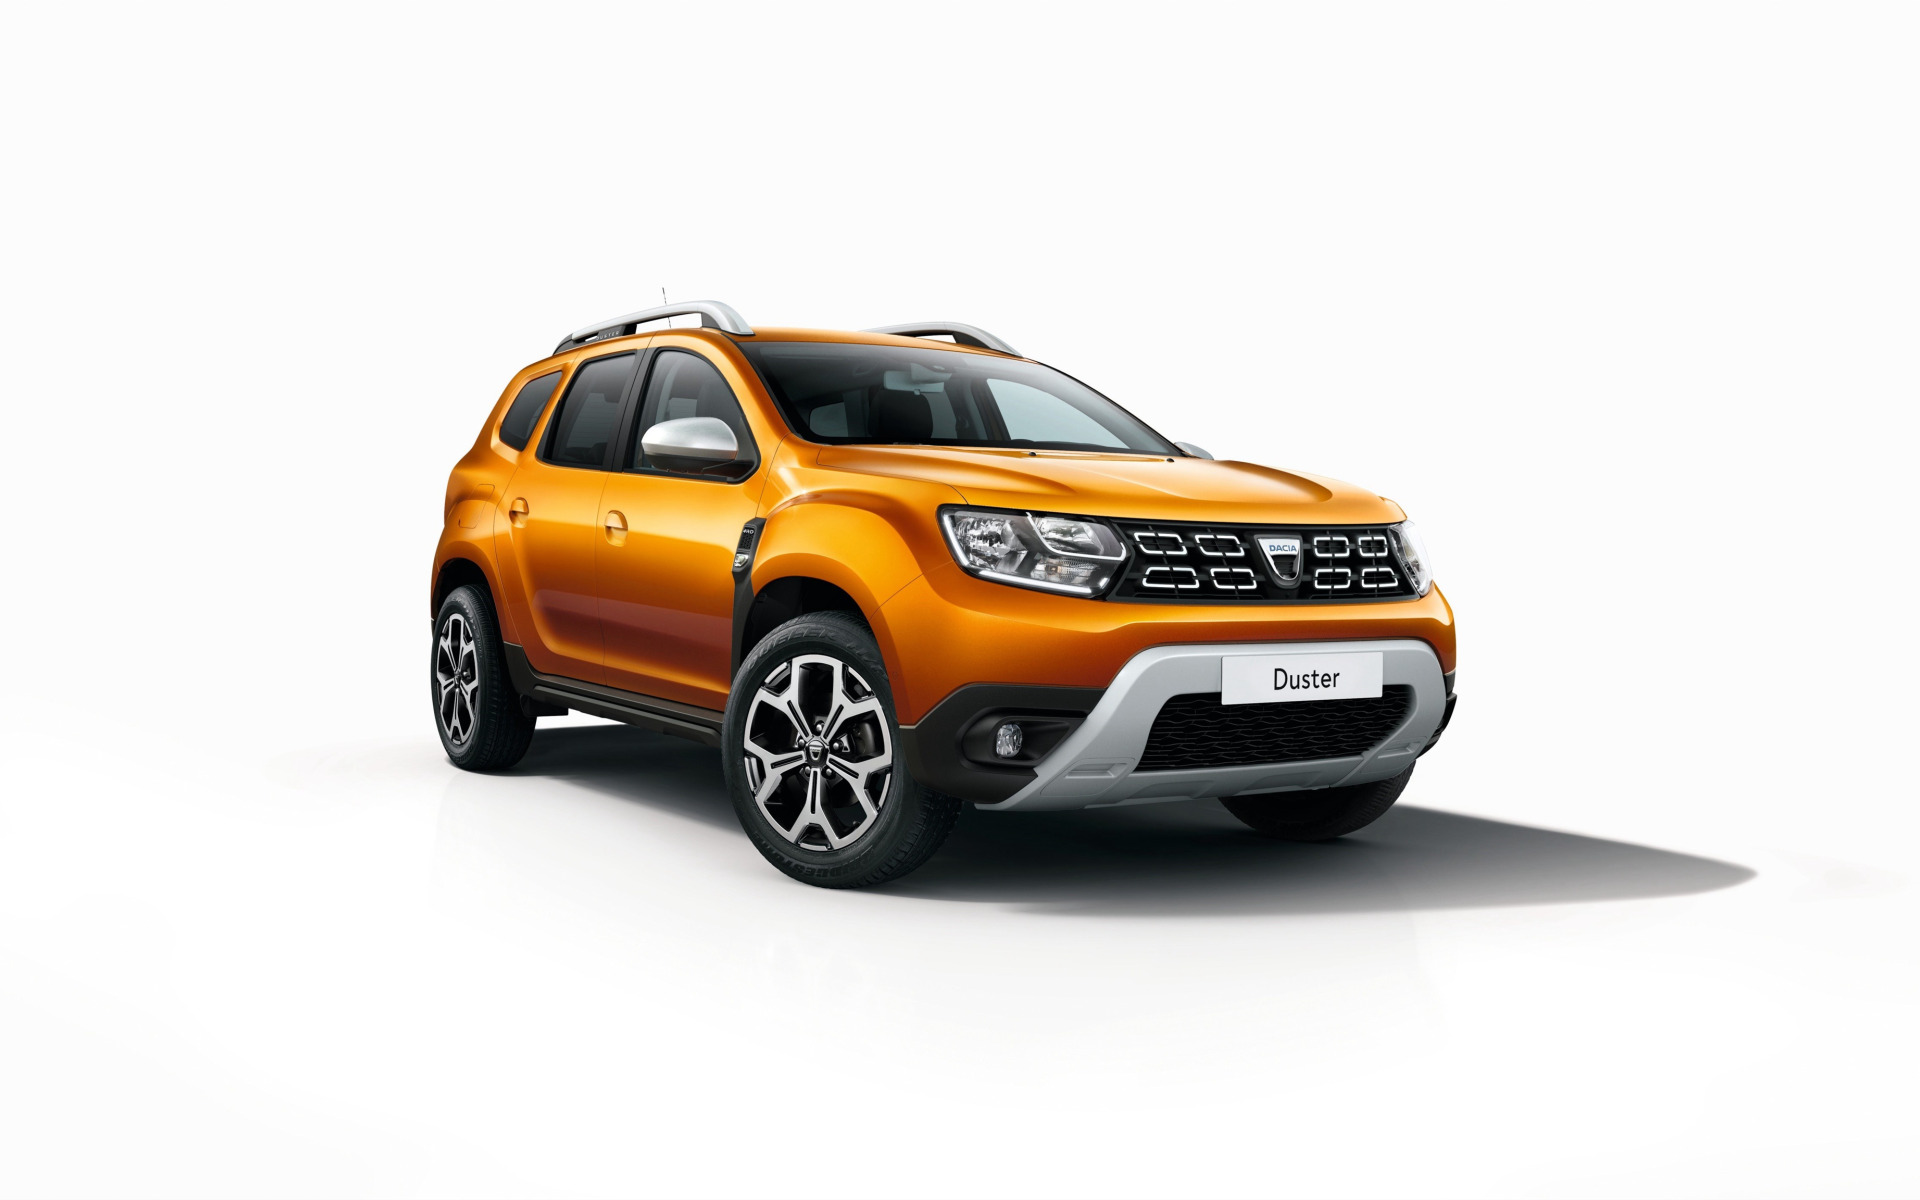 Renault Duster 2018. Renault Duster 2021. Рено Duster 2018. Renault Duster 2017. Рено дастер 2018 2.0